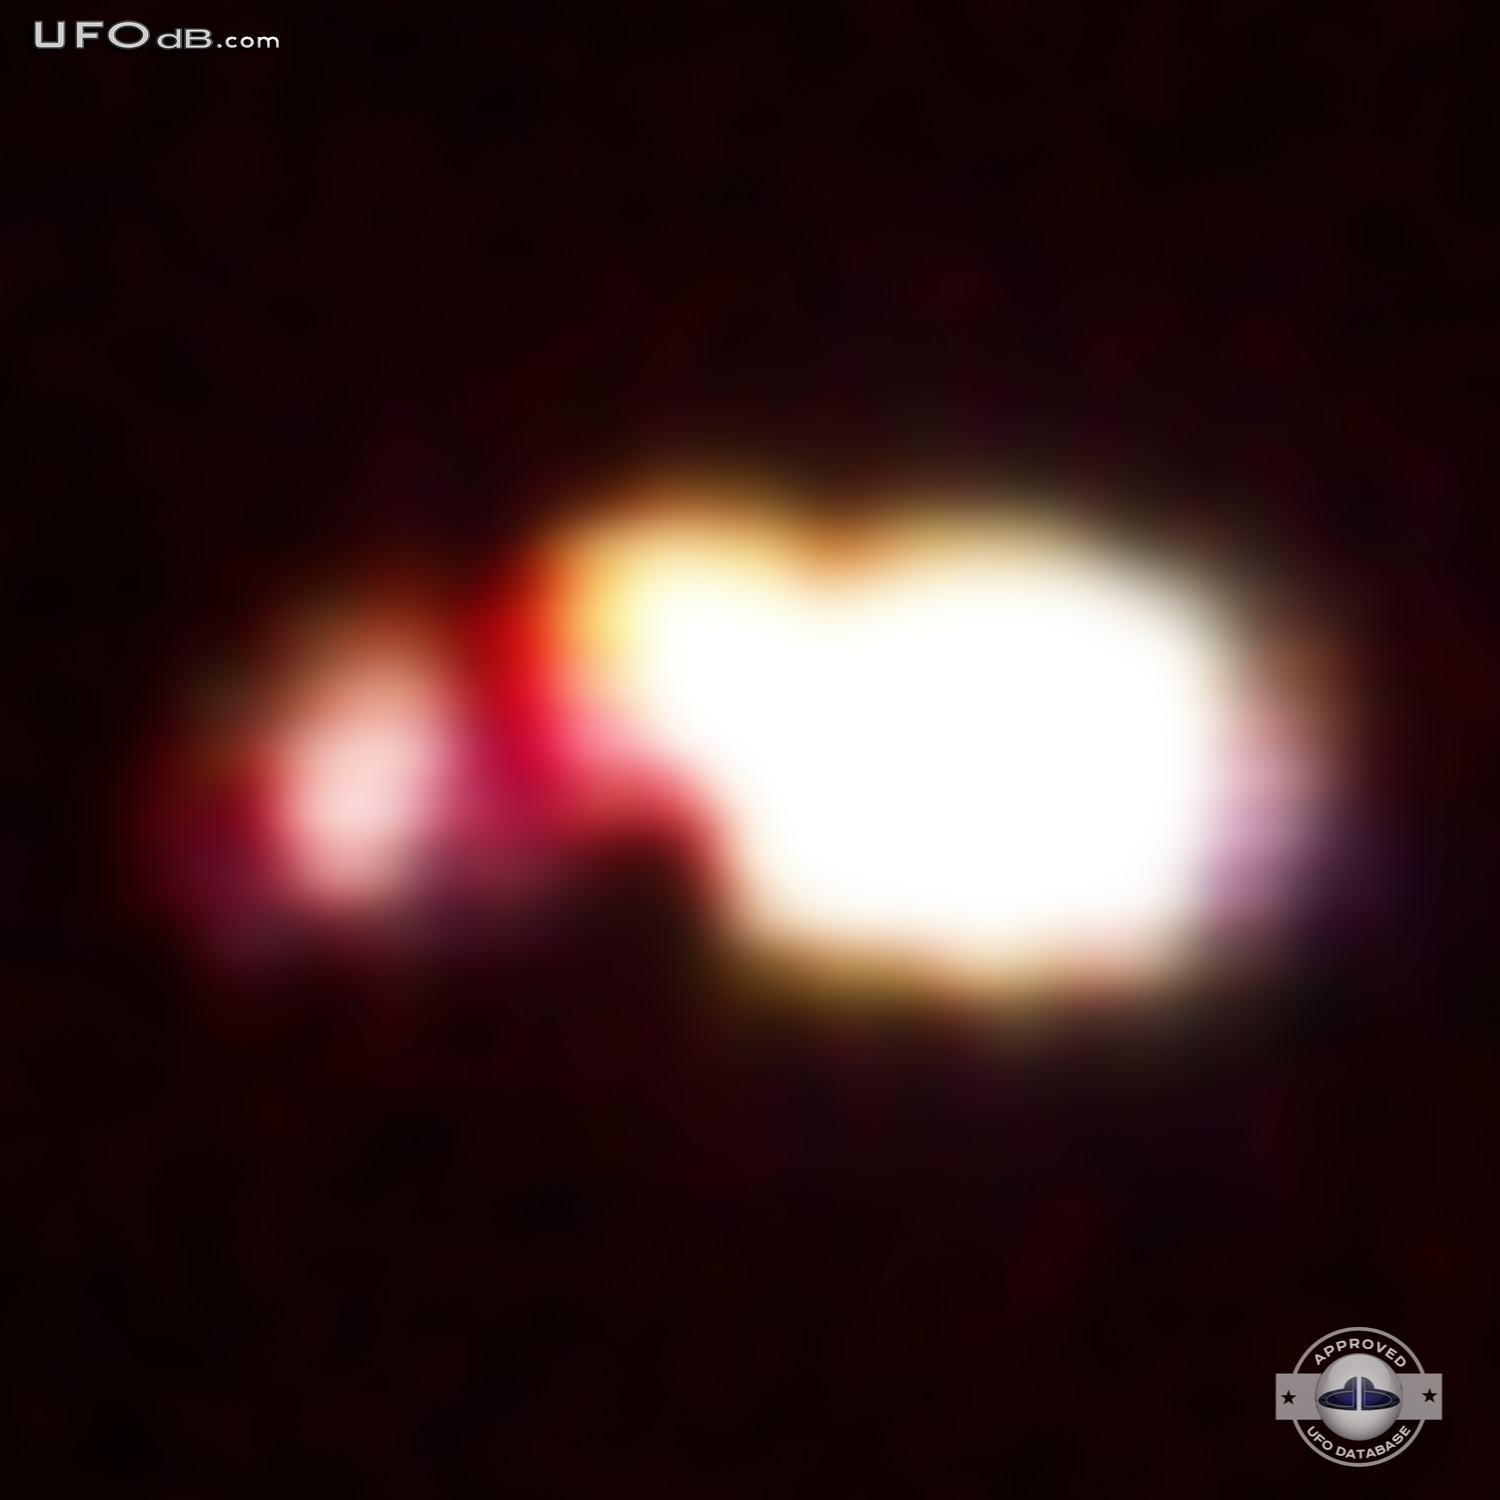 Silently out of nowhere | UFO passing overhead in Kentucky, USA | 2011 UFO Picture #364-4